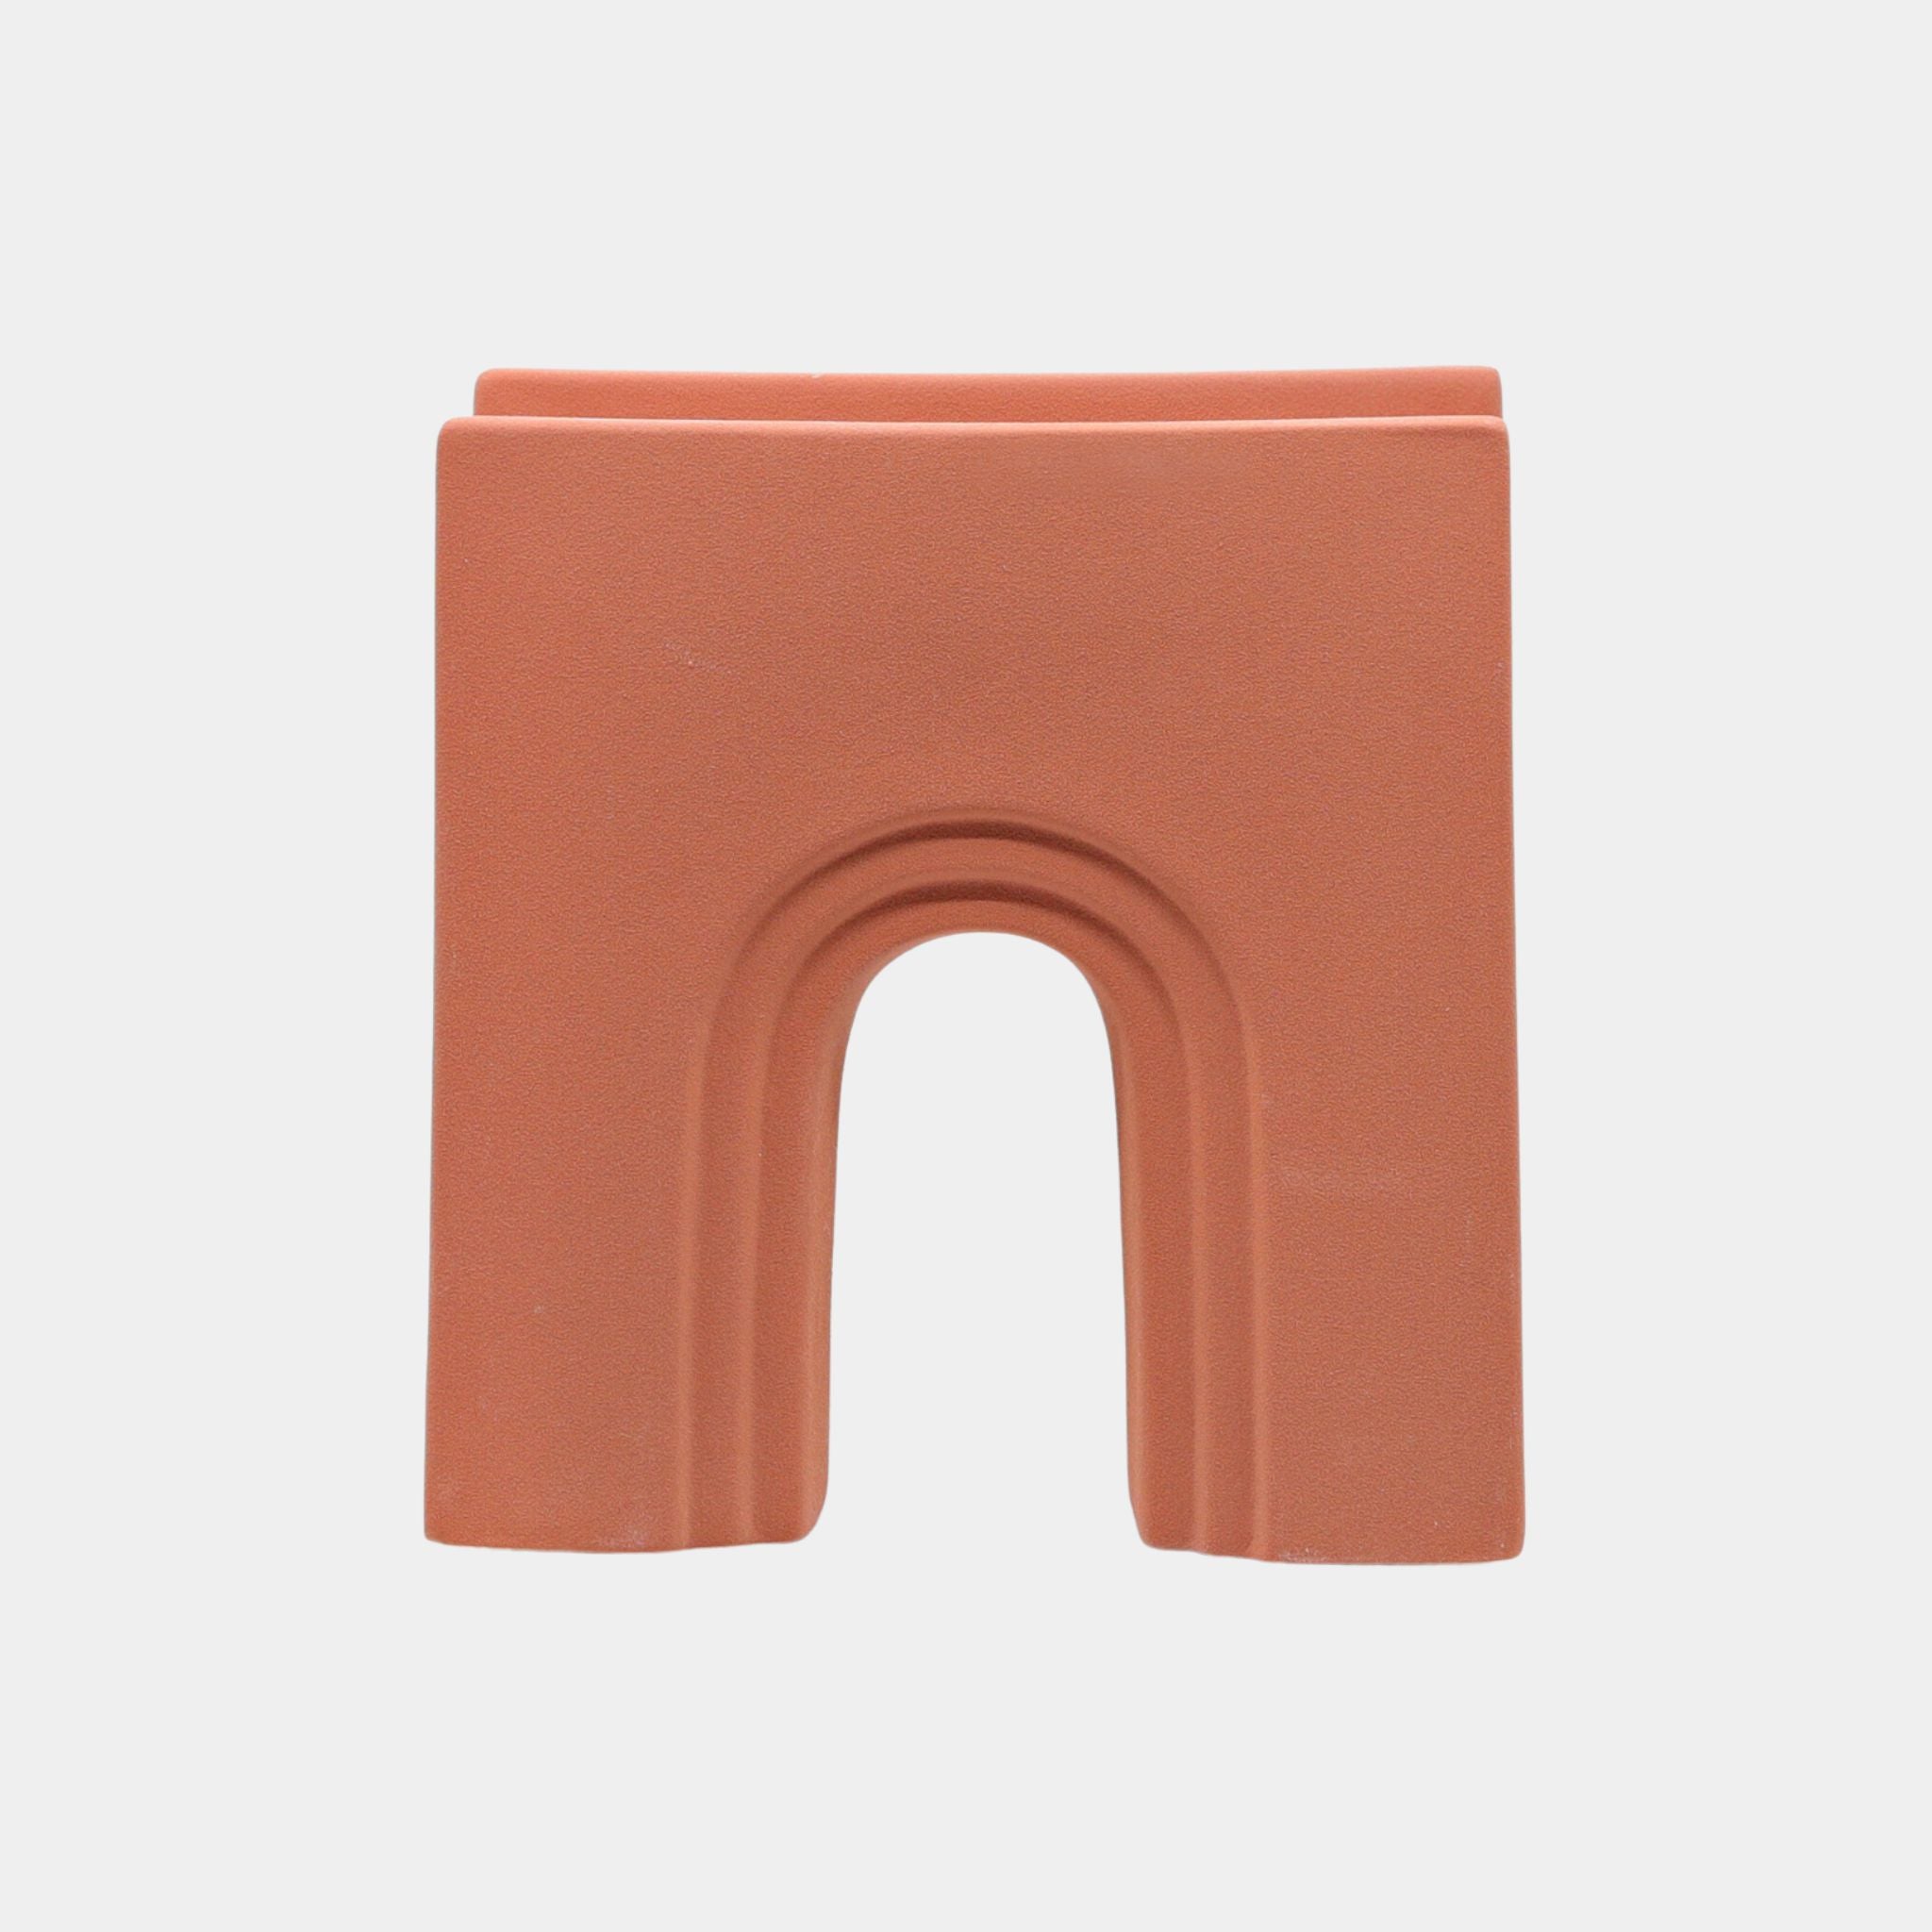 Ceramic Vase | Arched Series - Red - The Feelter